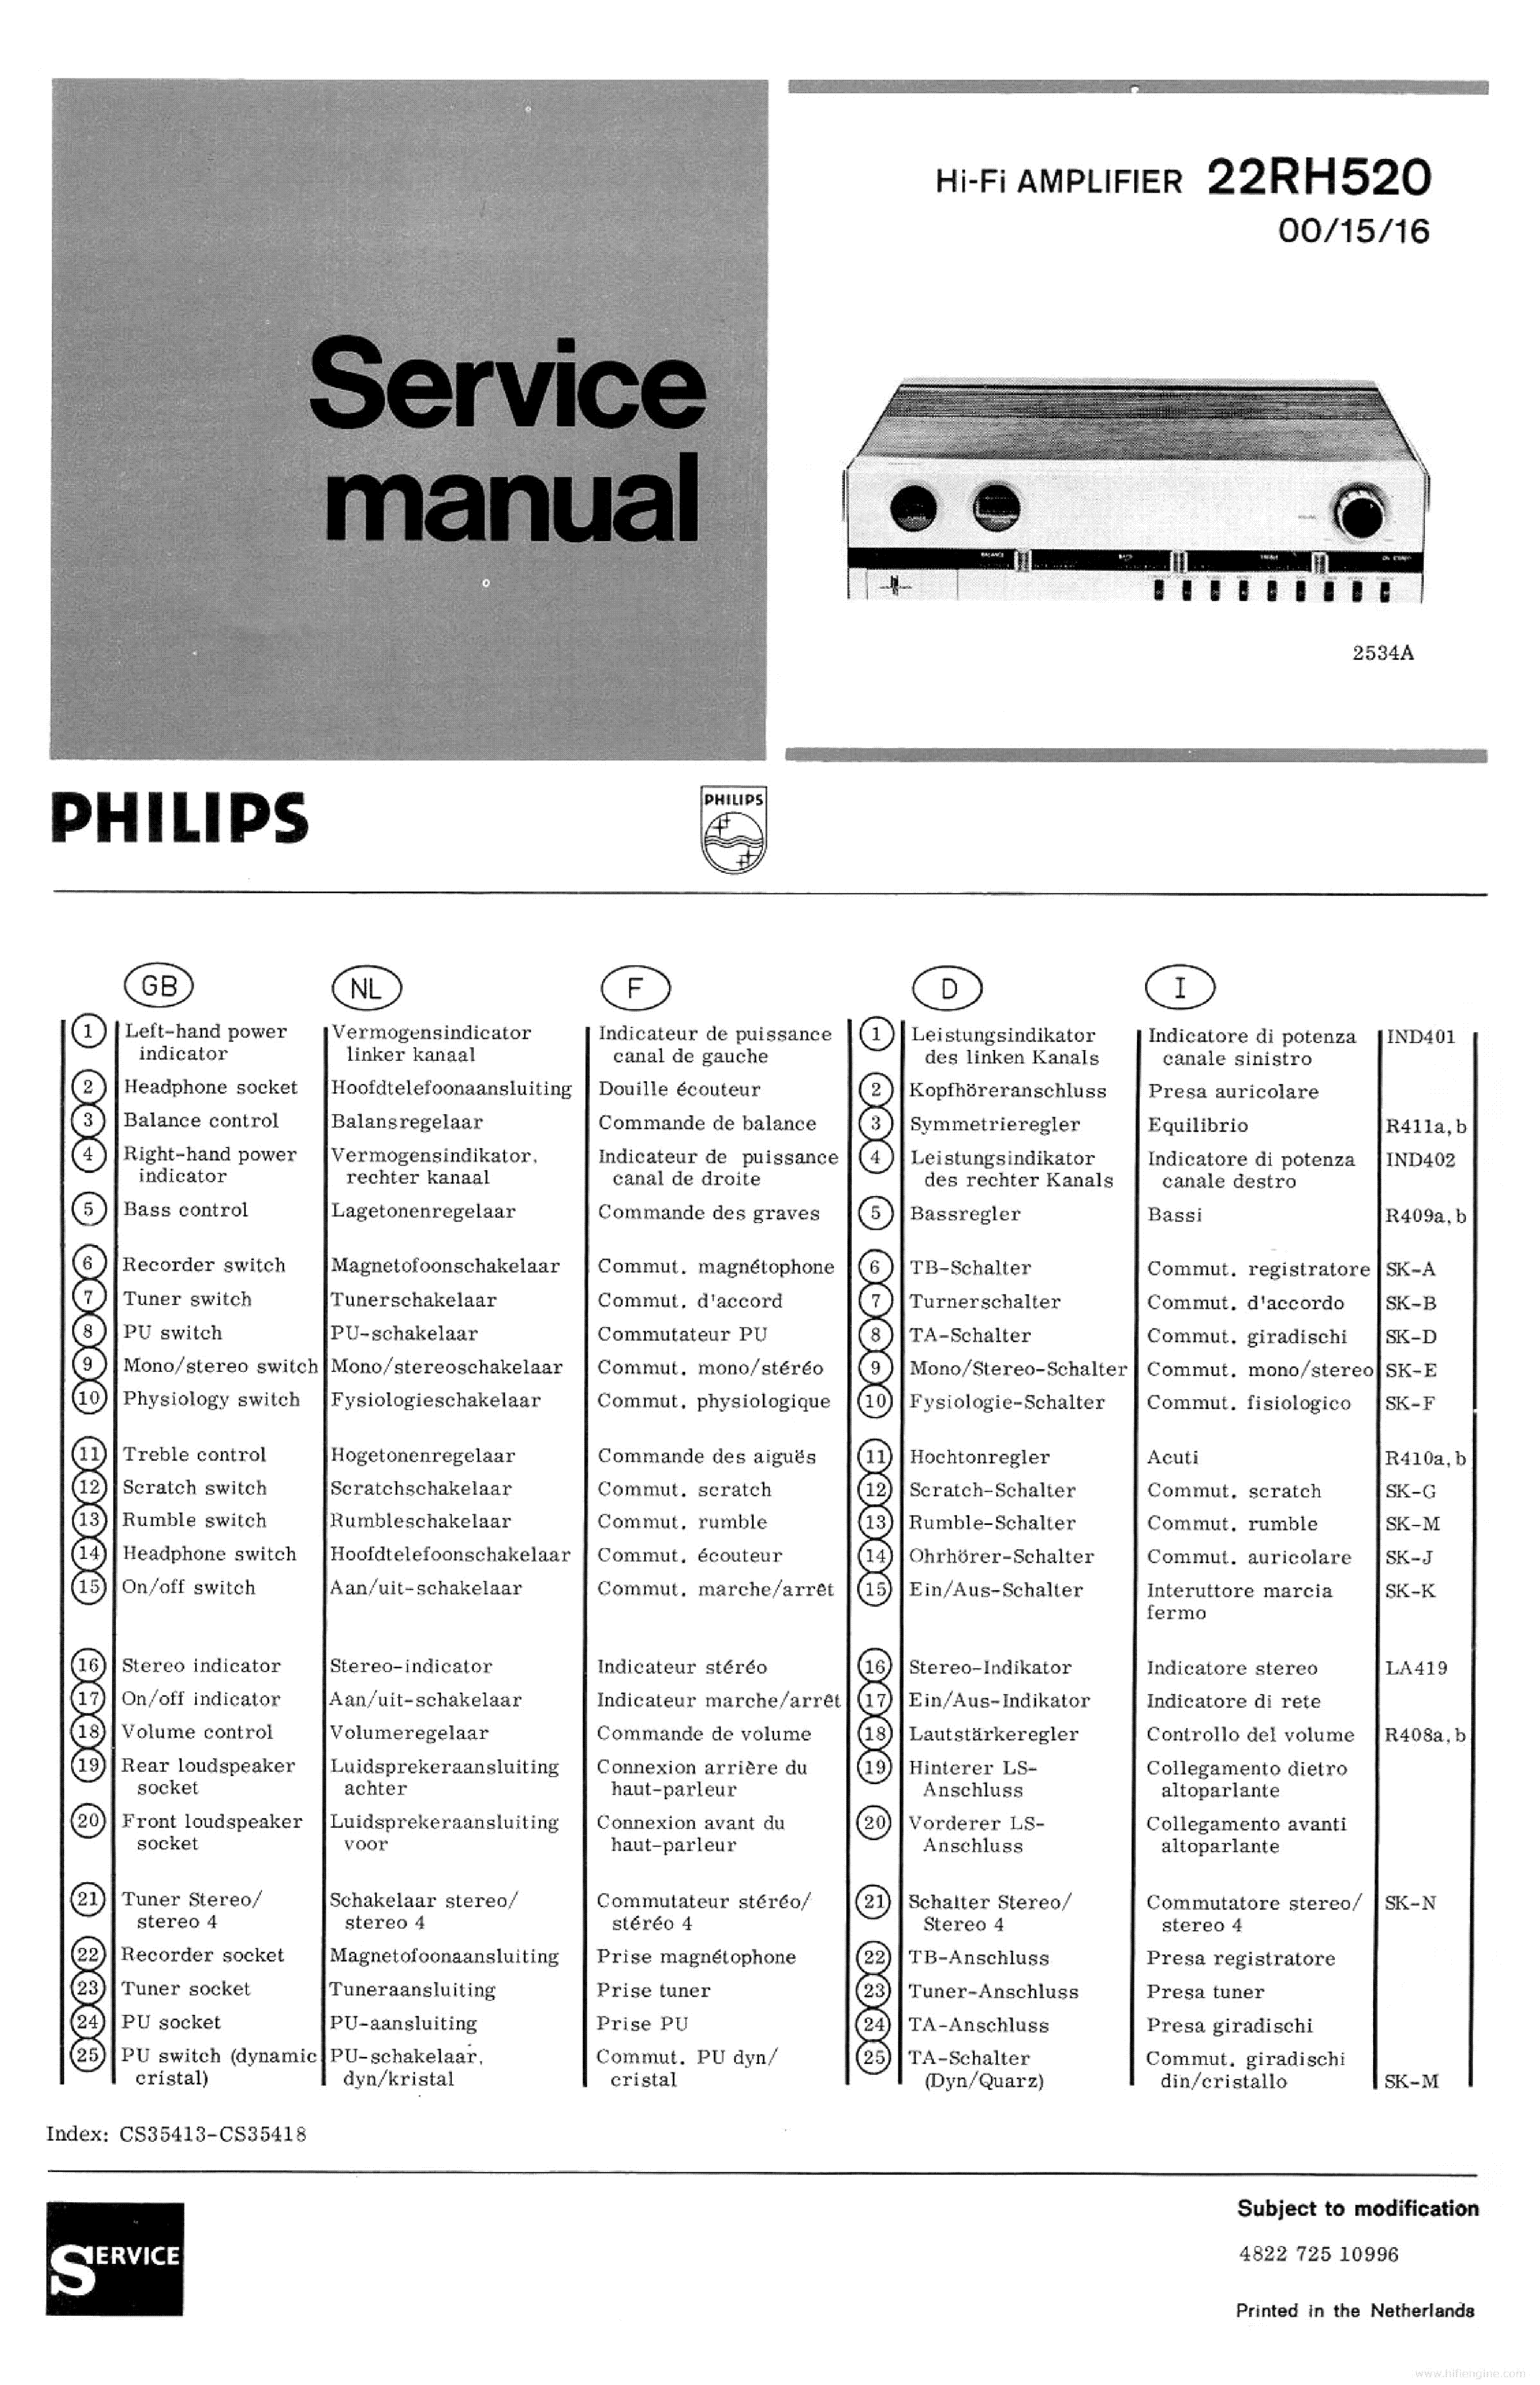 PHILIPS 22RH520-00R 16R 33R SM service manual (2nd page)